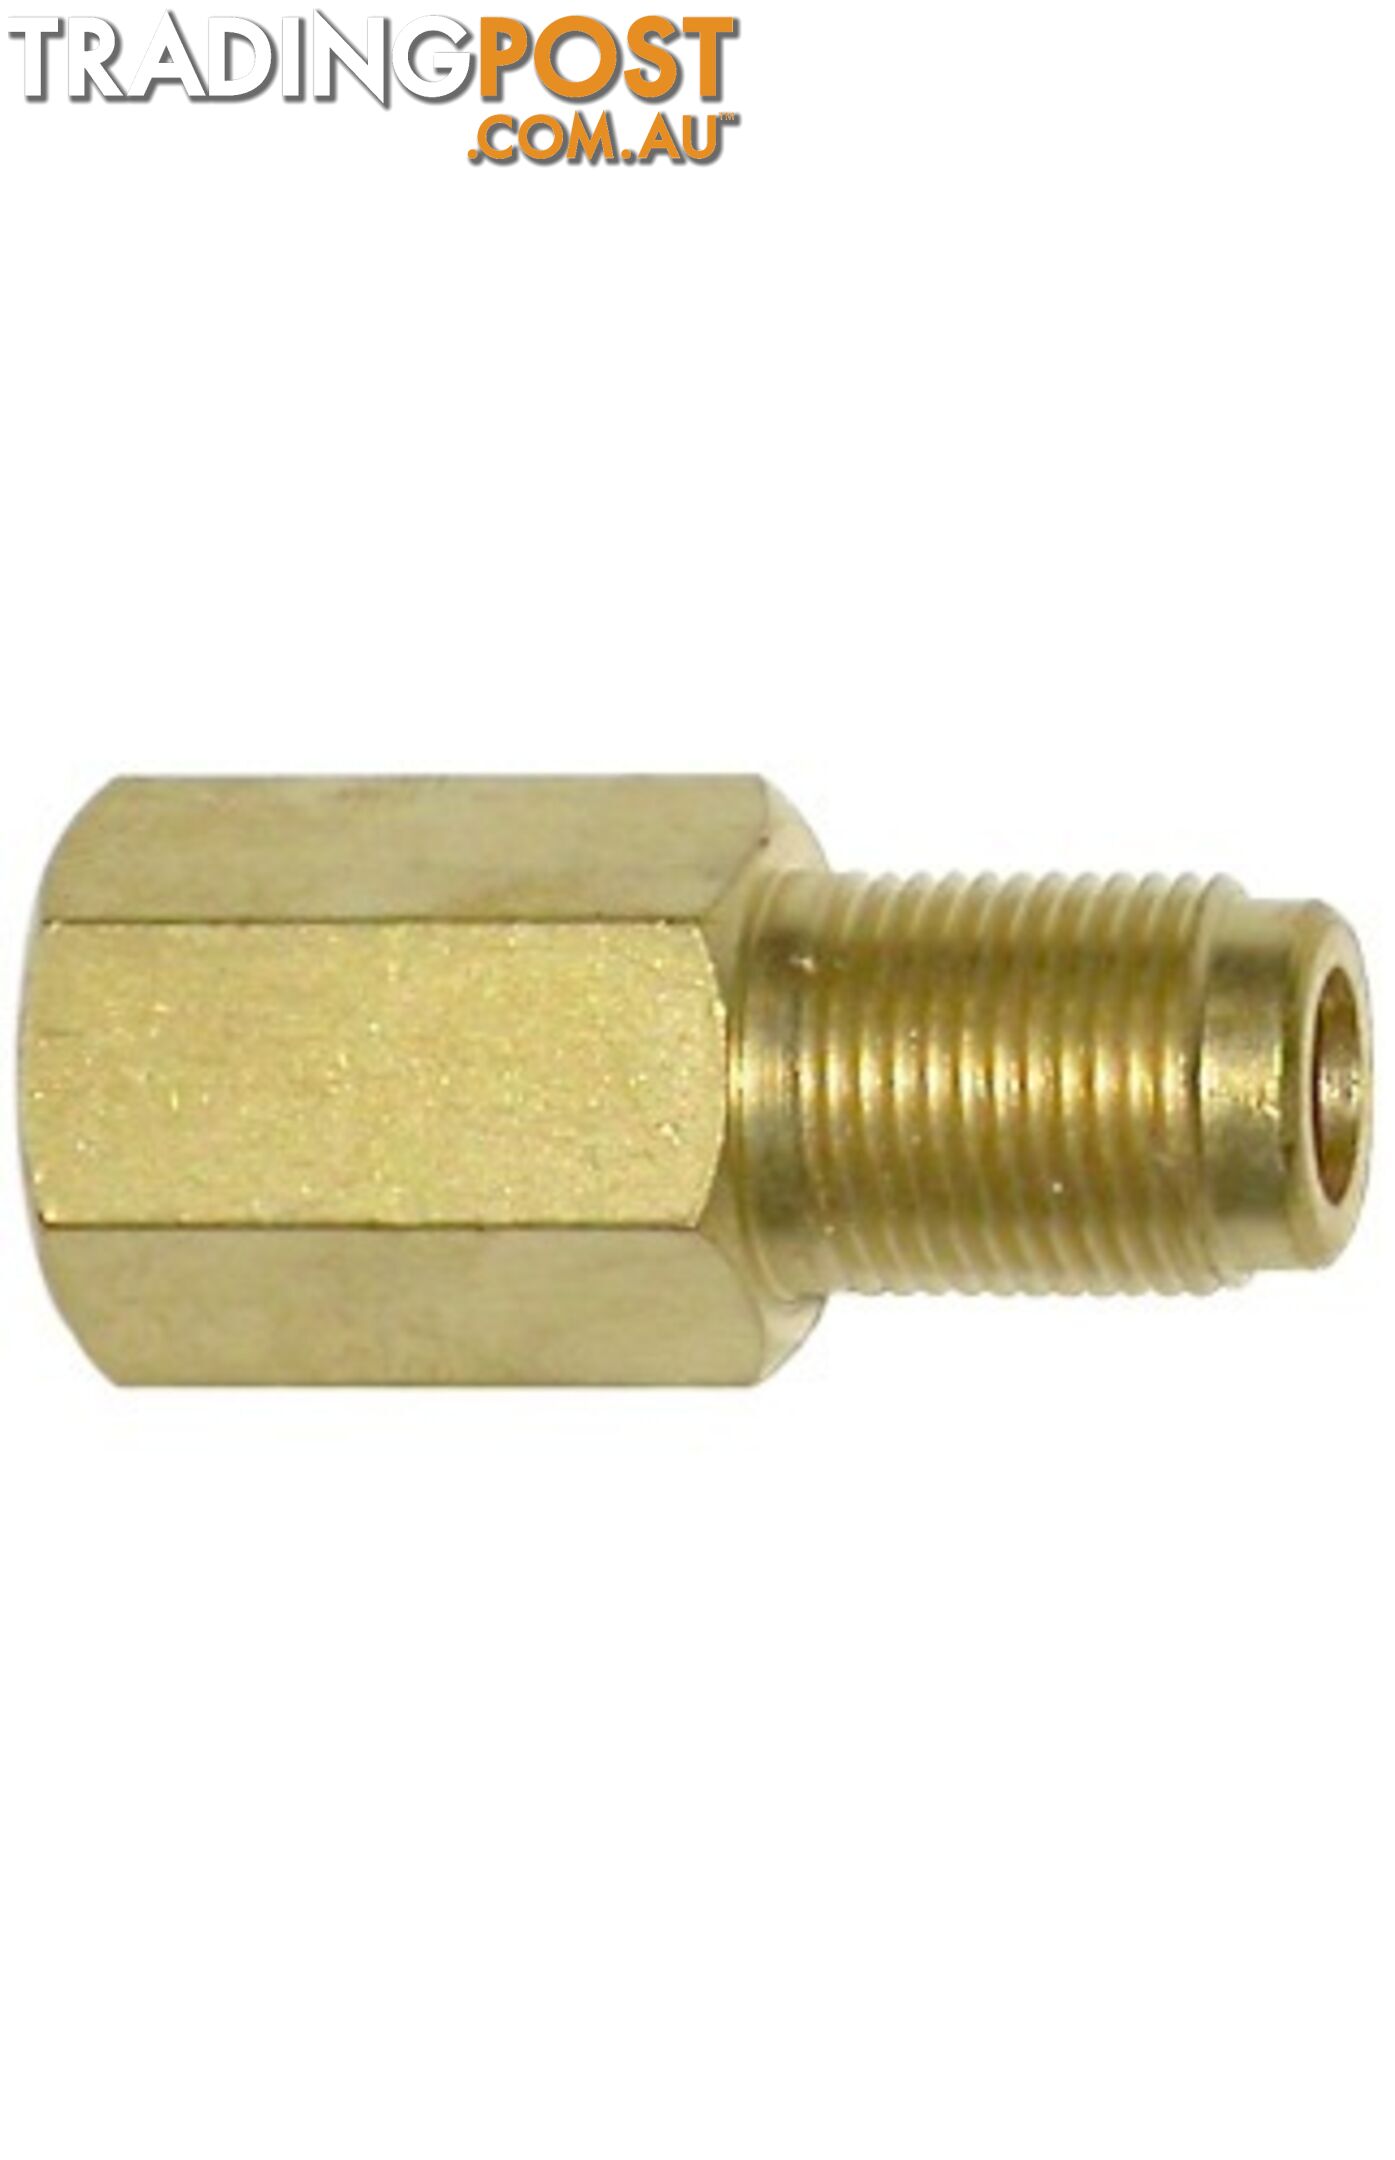 Adaptor for Heating Barrels Suitable for Heavy Duty Heating Tips